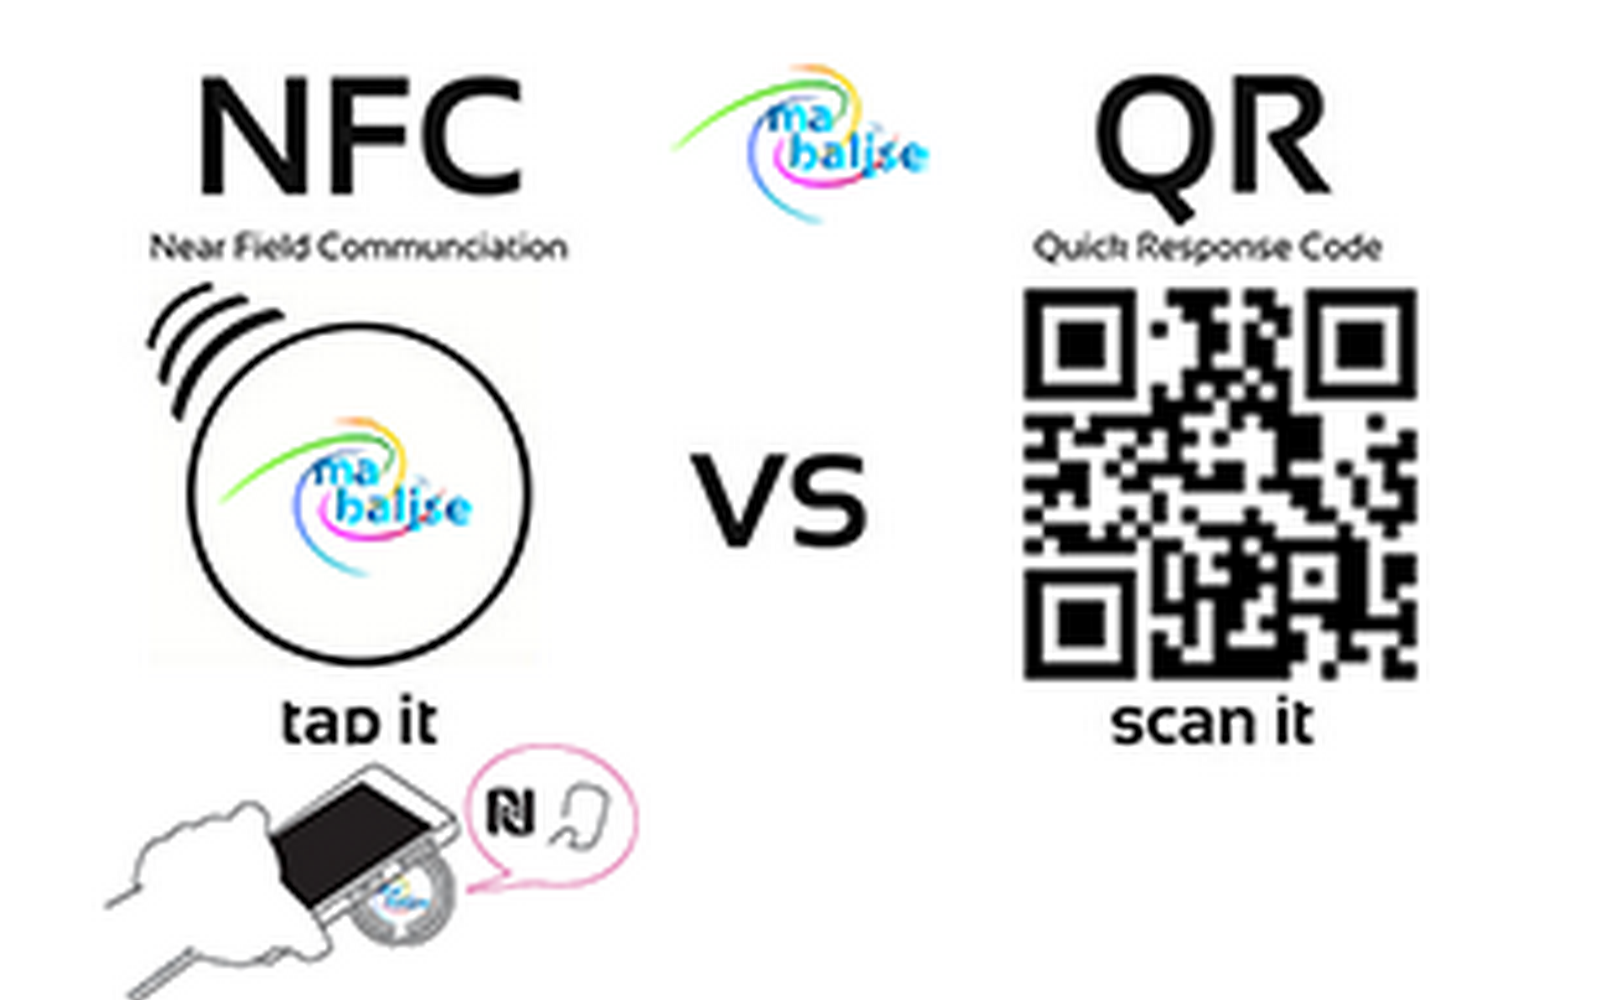 What are the advantages of NFC vs QR Code?